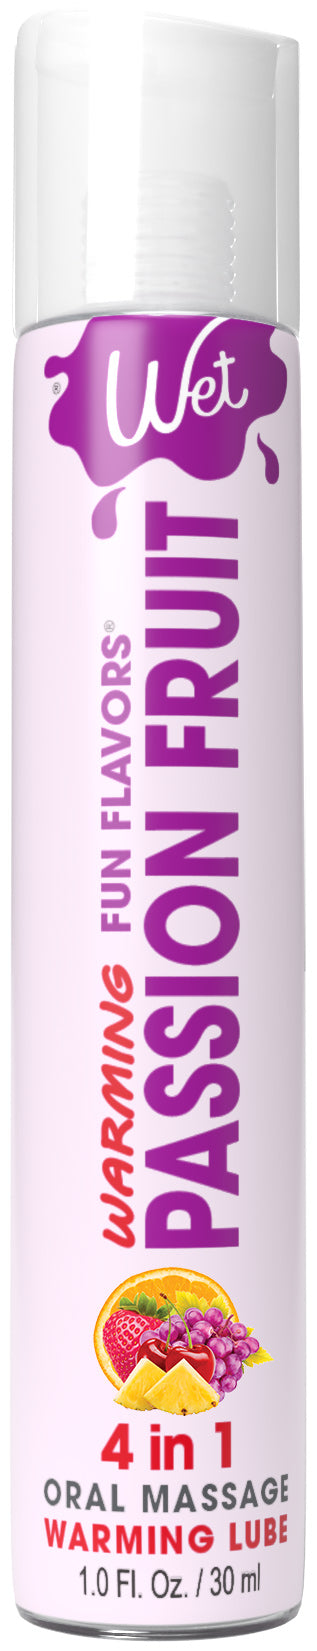 Wet Warming Fun Flavors - Passion Fruit - 4 in 1  Lubricant 1 Oz